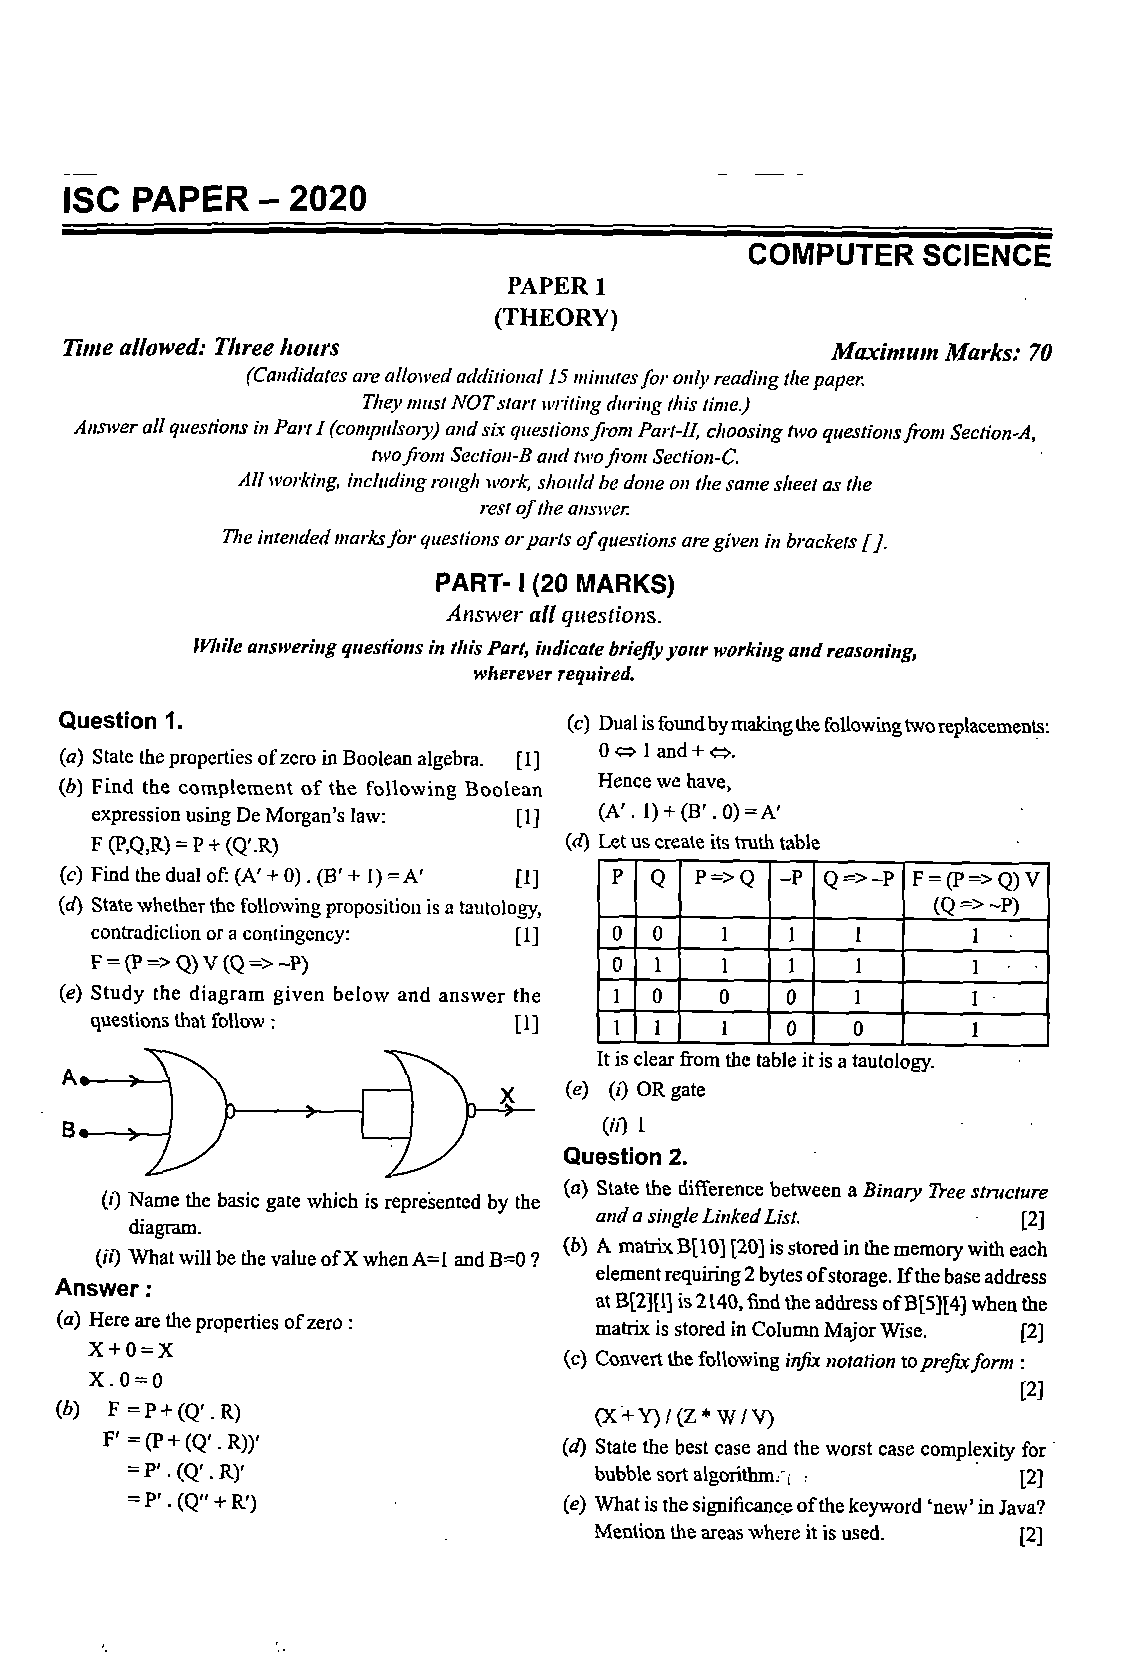 ISC Class 12 Computer Science 2020 Question Paper